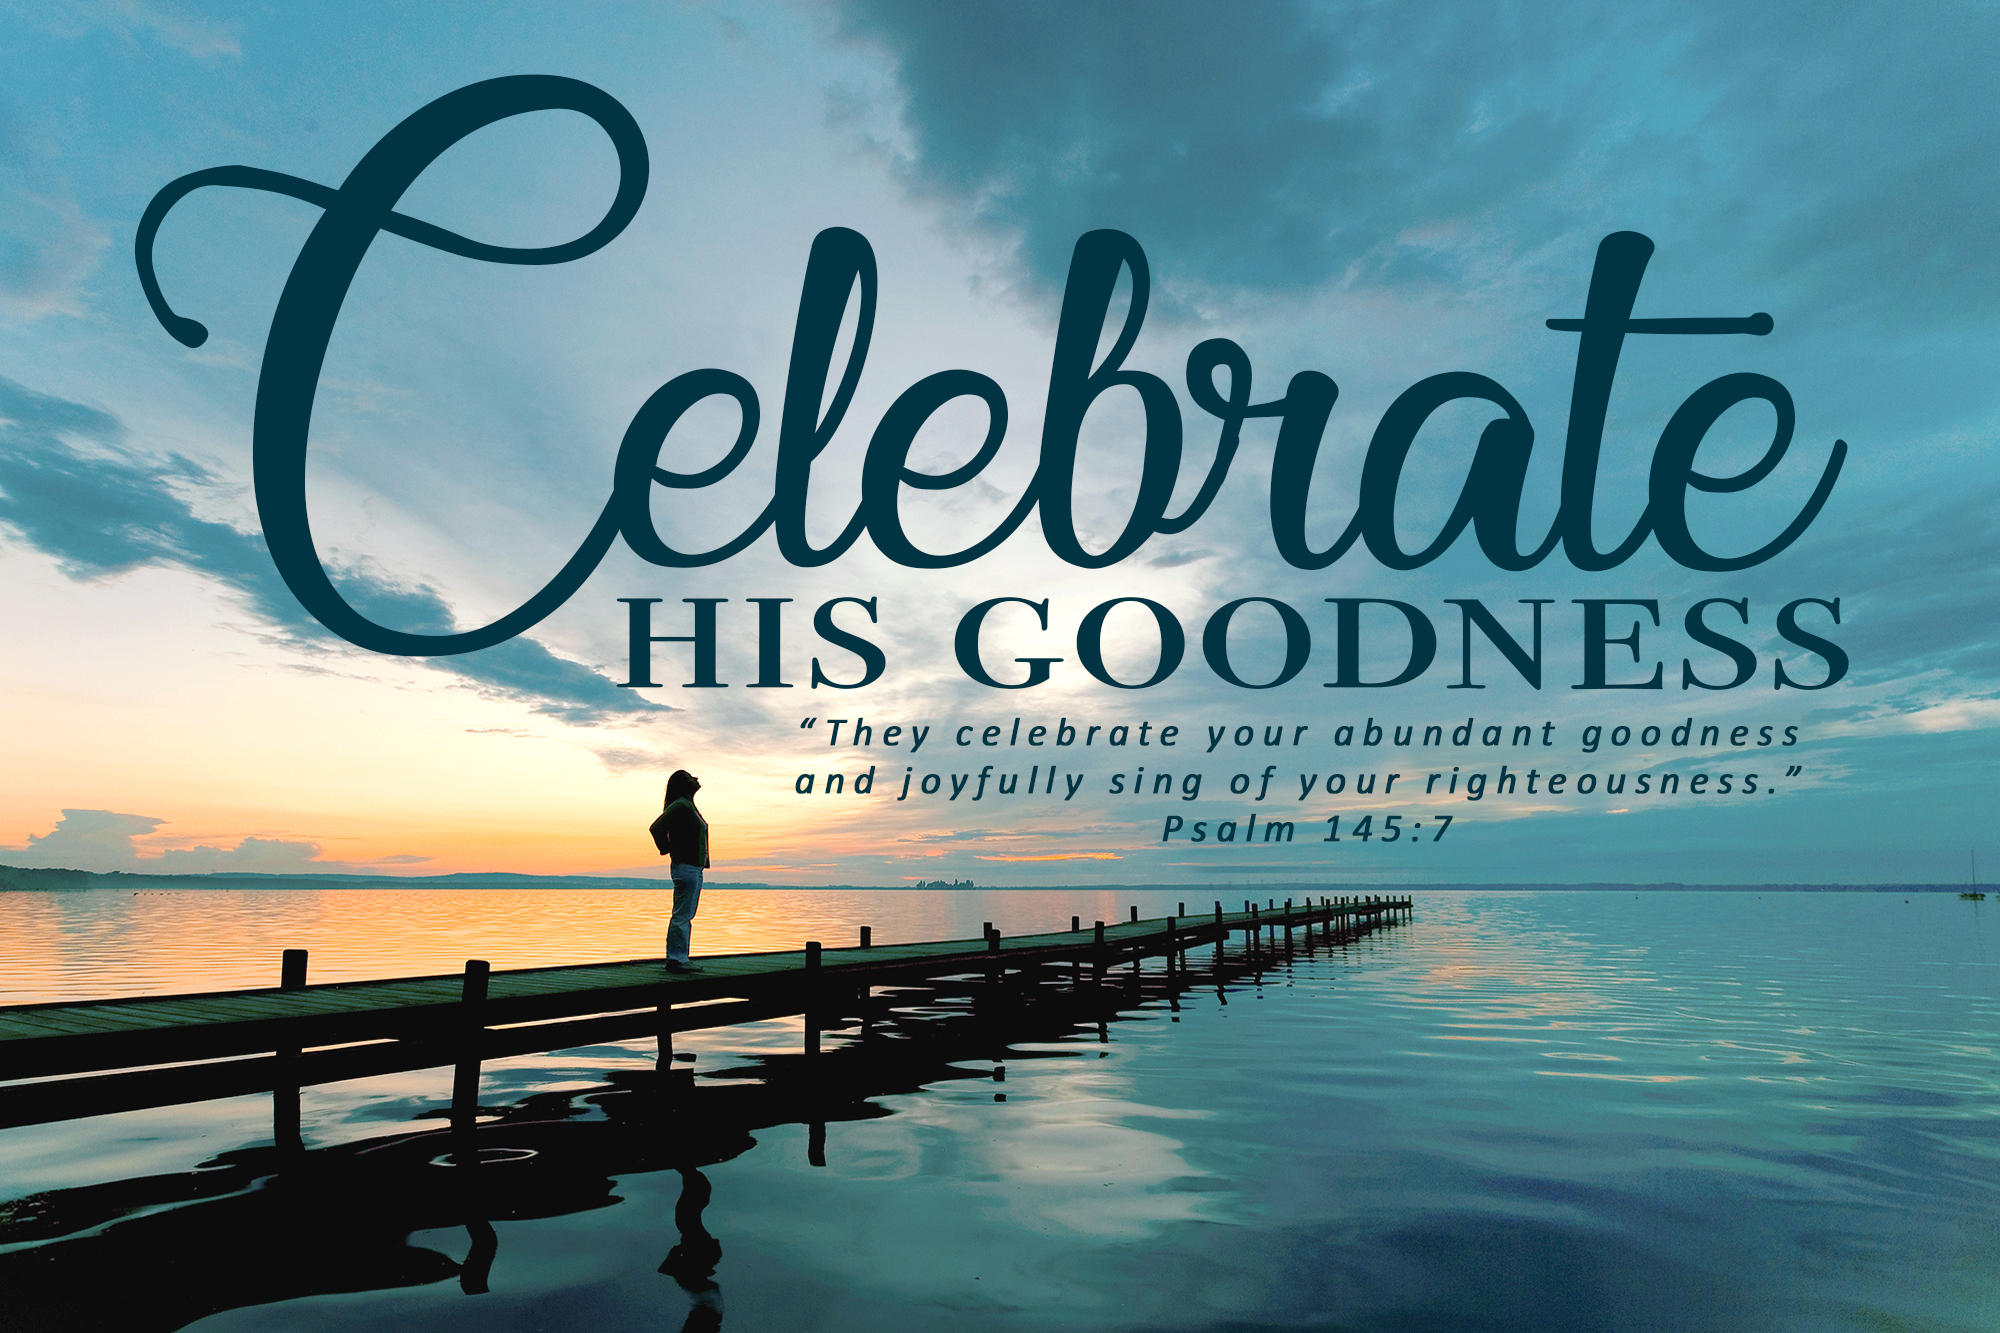 Celebrate His Goodness - The Salvation Army USA National Women's Ministries